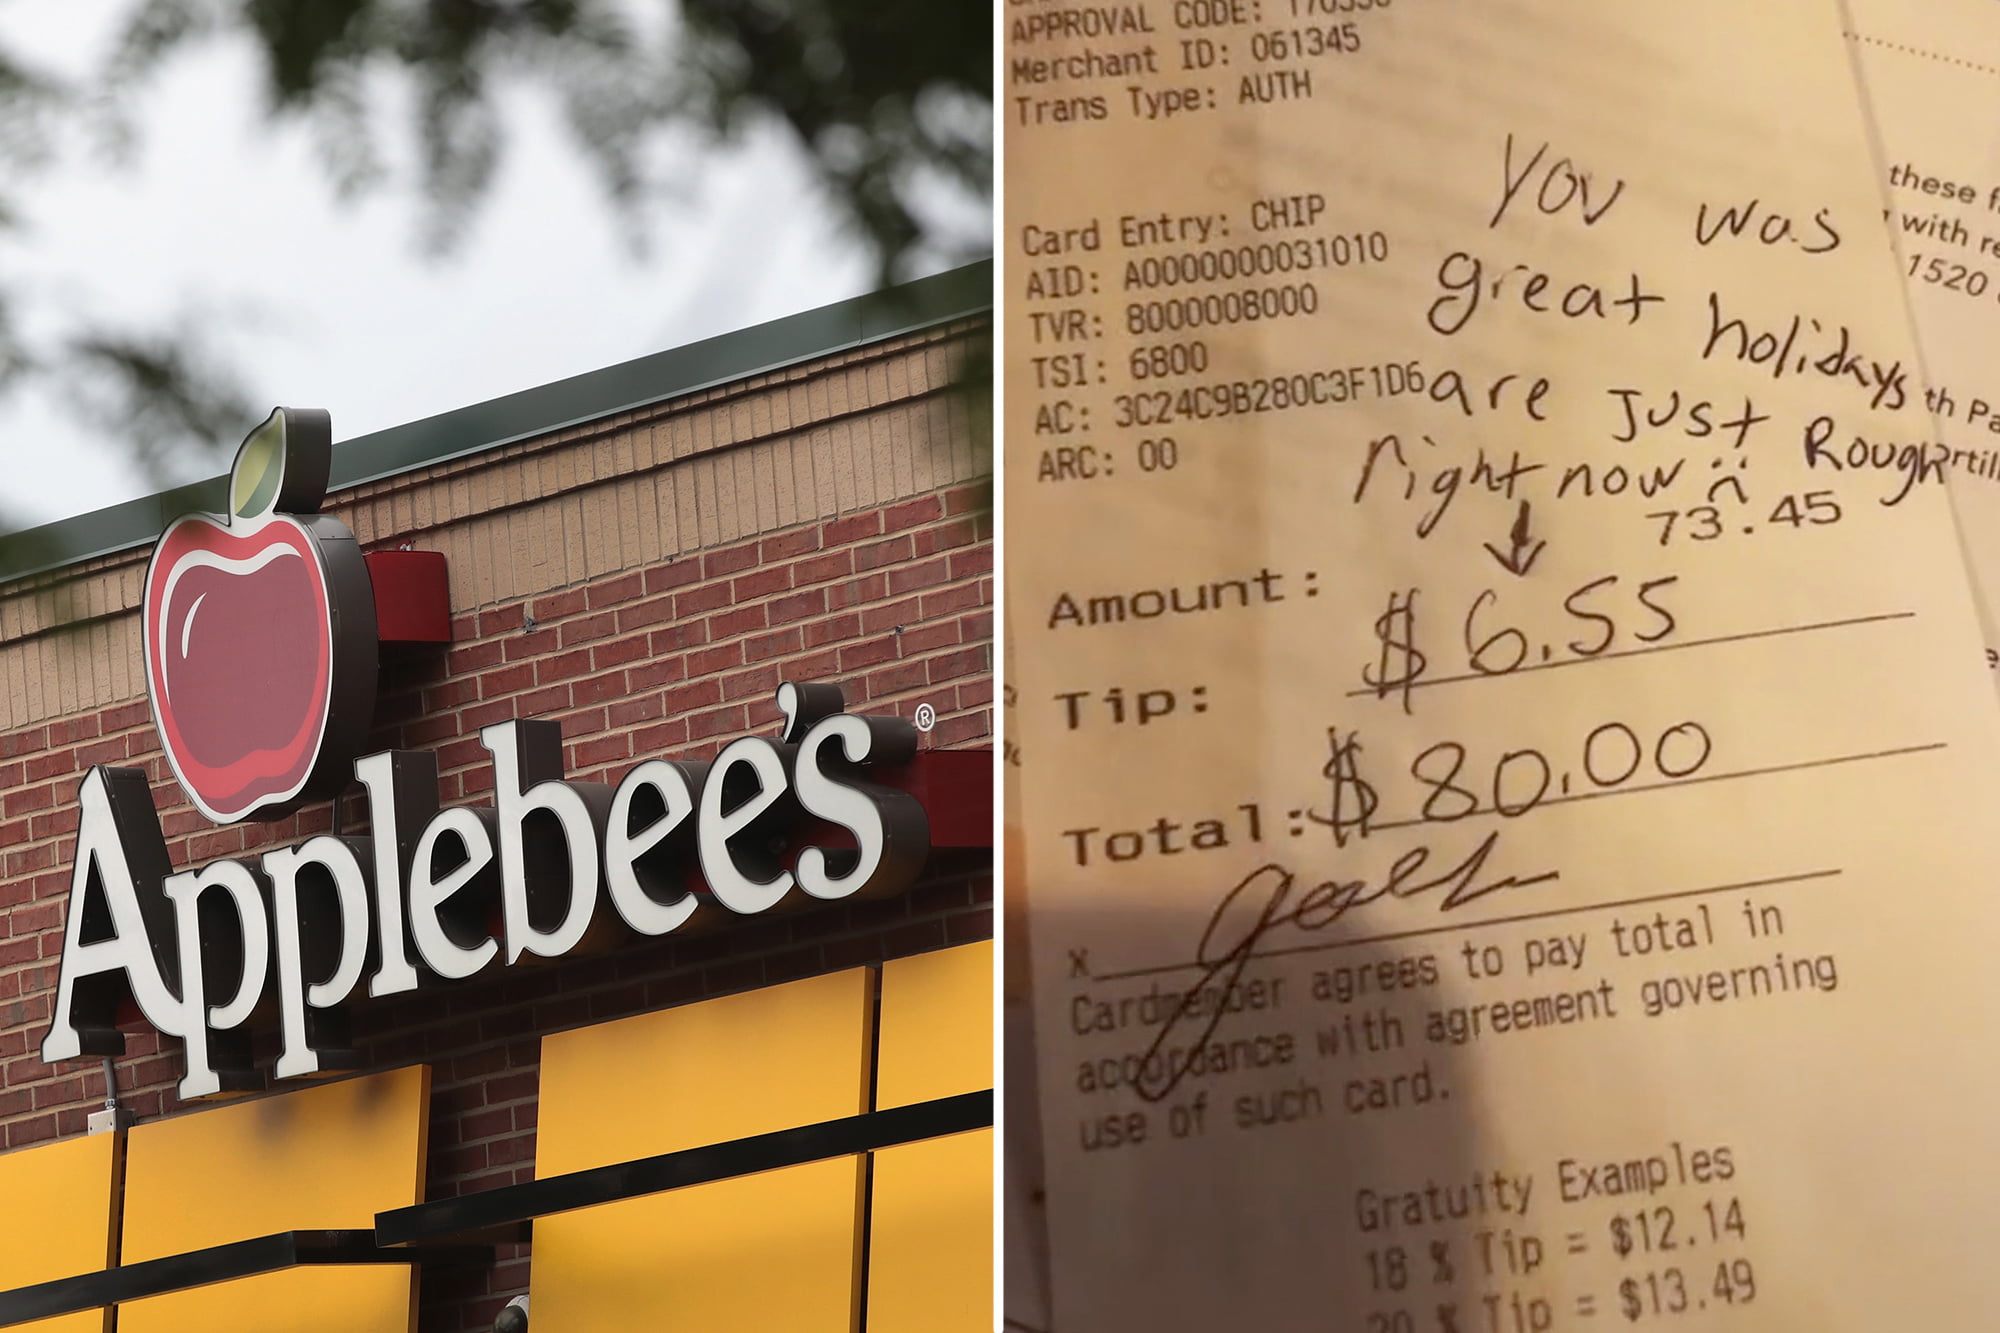 Waiter tip shames customer who couldn’t afford 20% gratuity